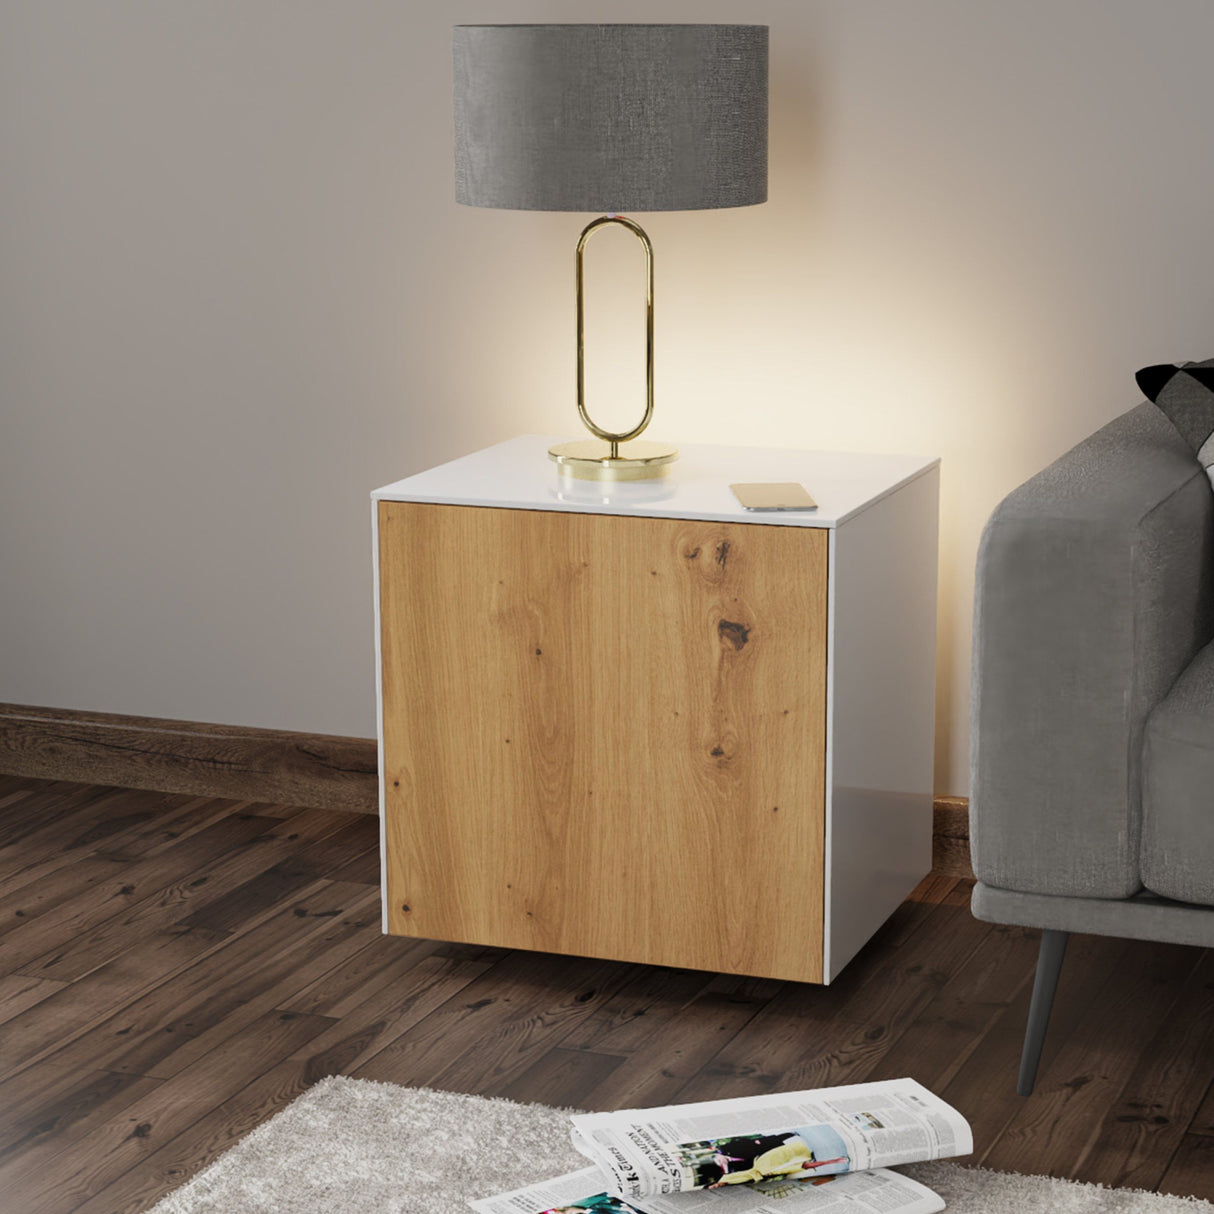 Frank Olsen IntelliLamp High Gloss White And Oak Lamp Table With LED Lighting and Wireless Phone Charging